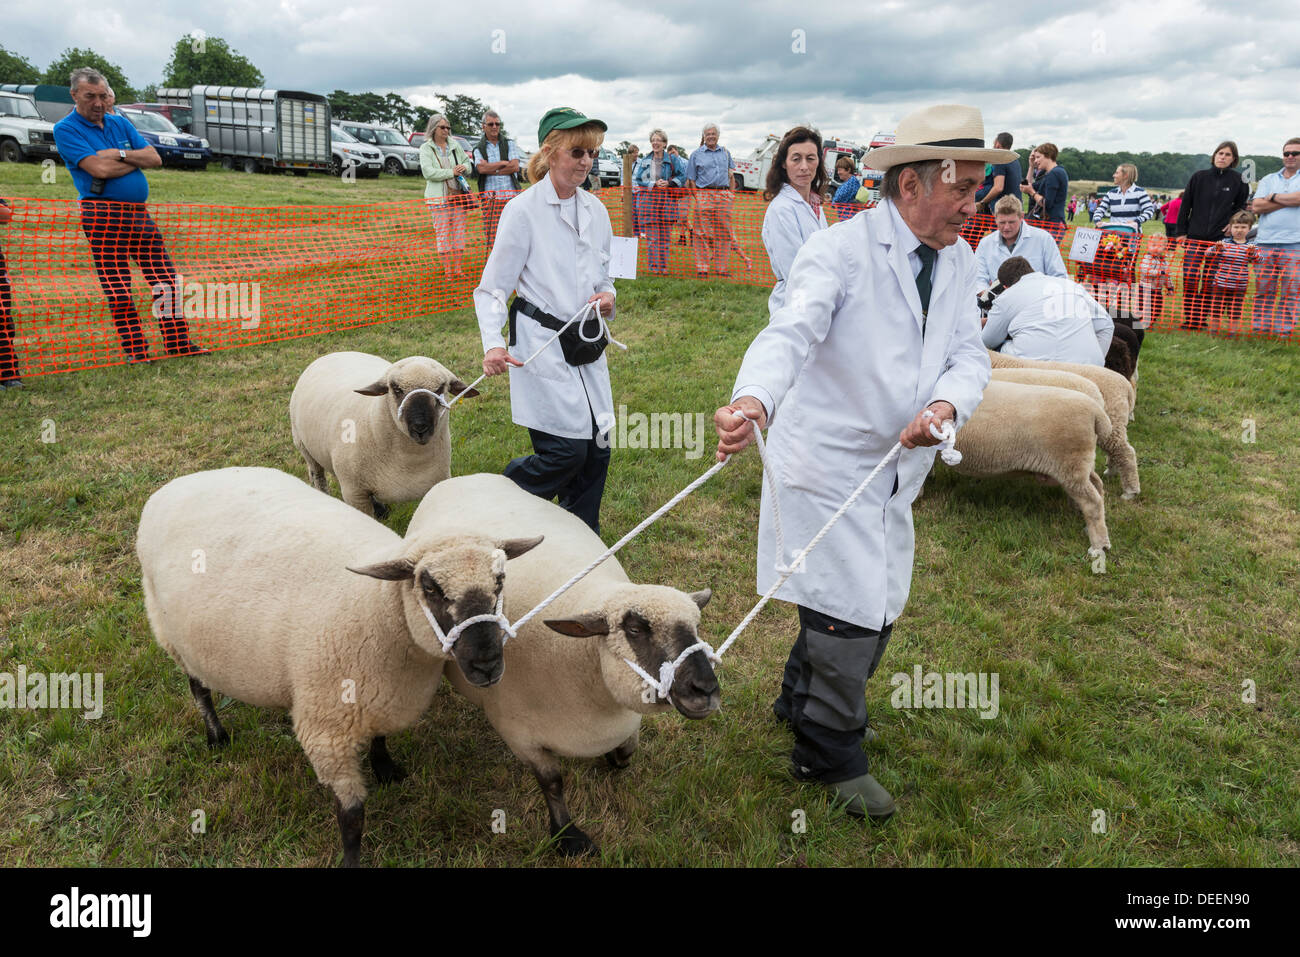 Sheep being walked around judging ring by handlers at agricultural show UK Stock Photo